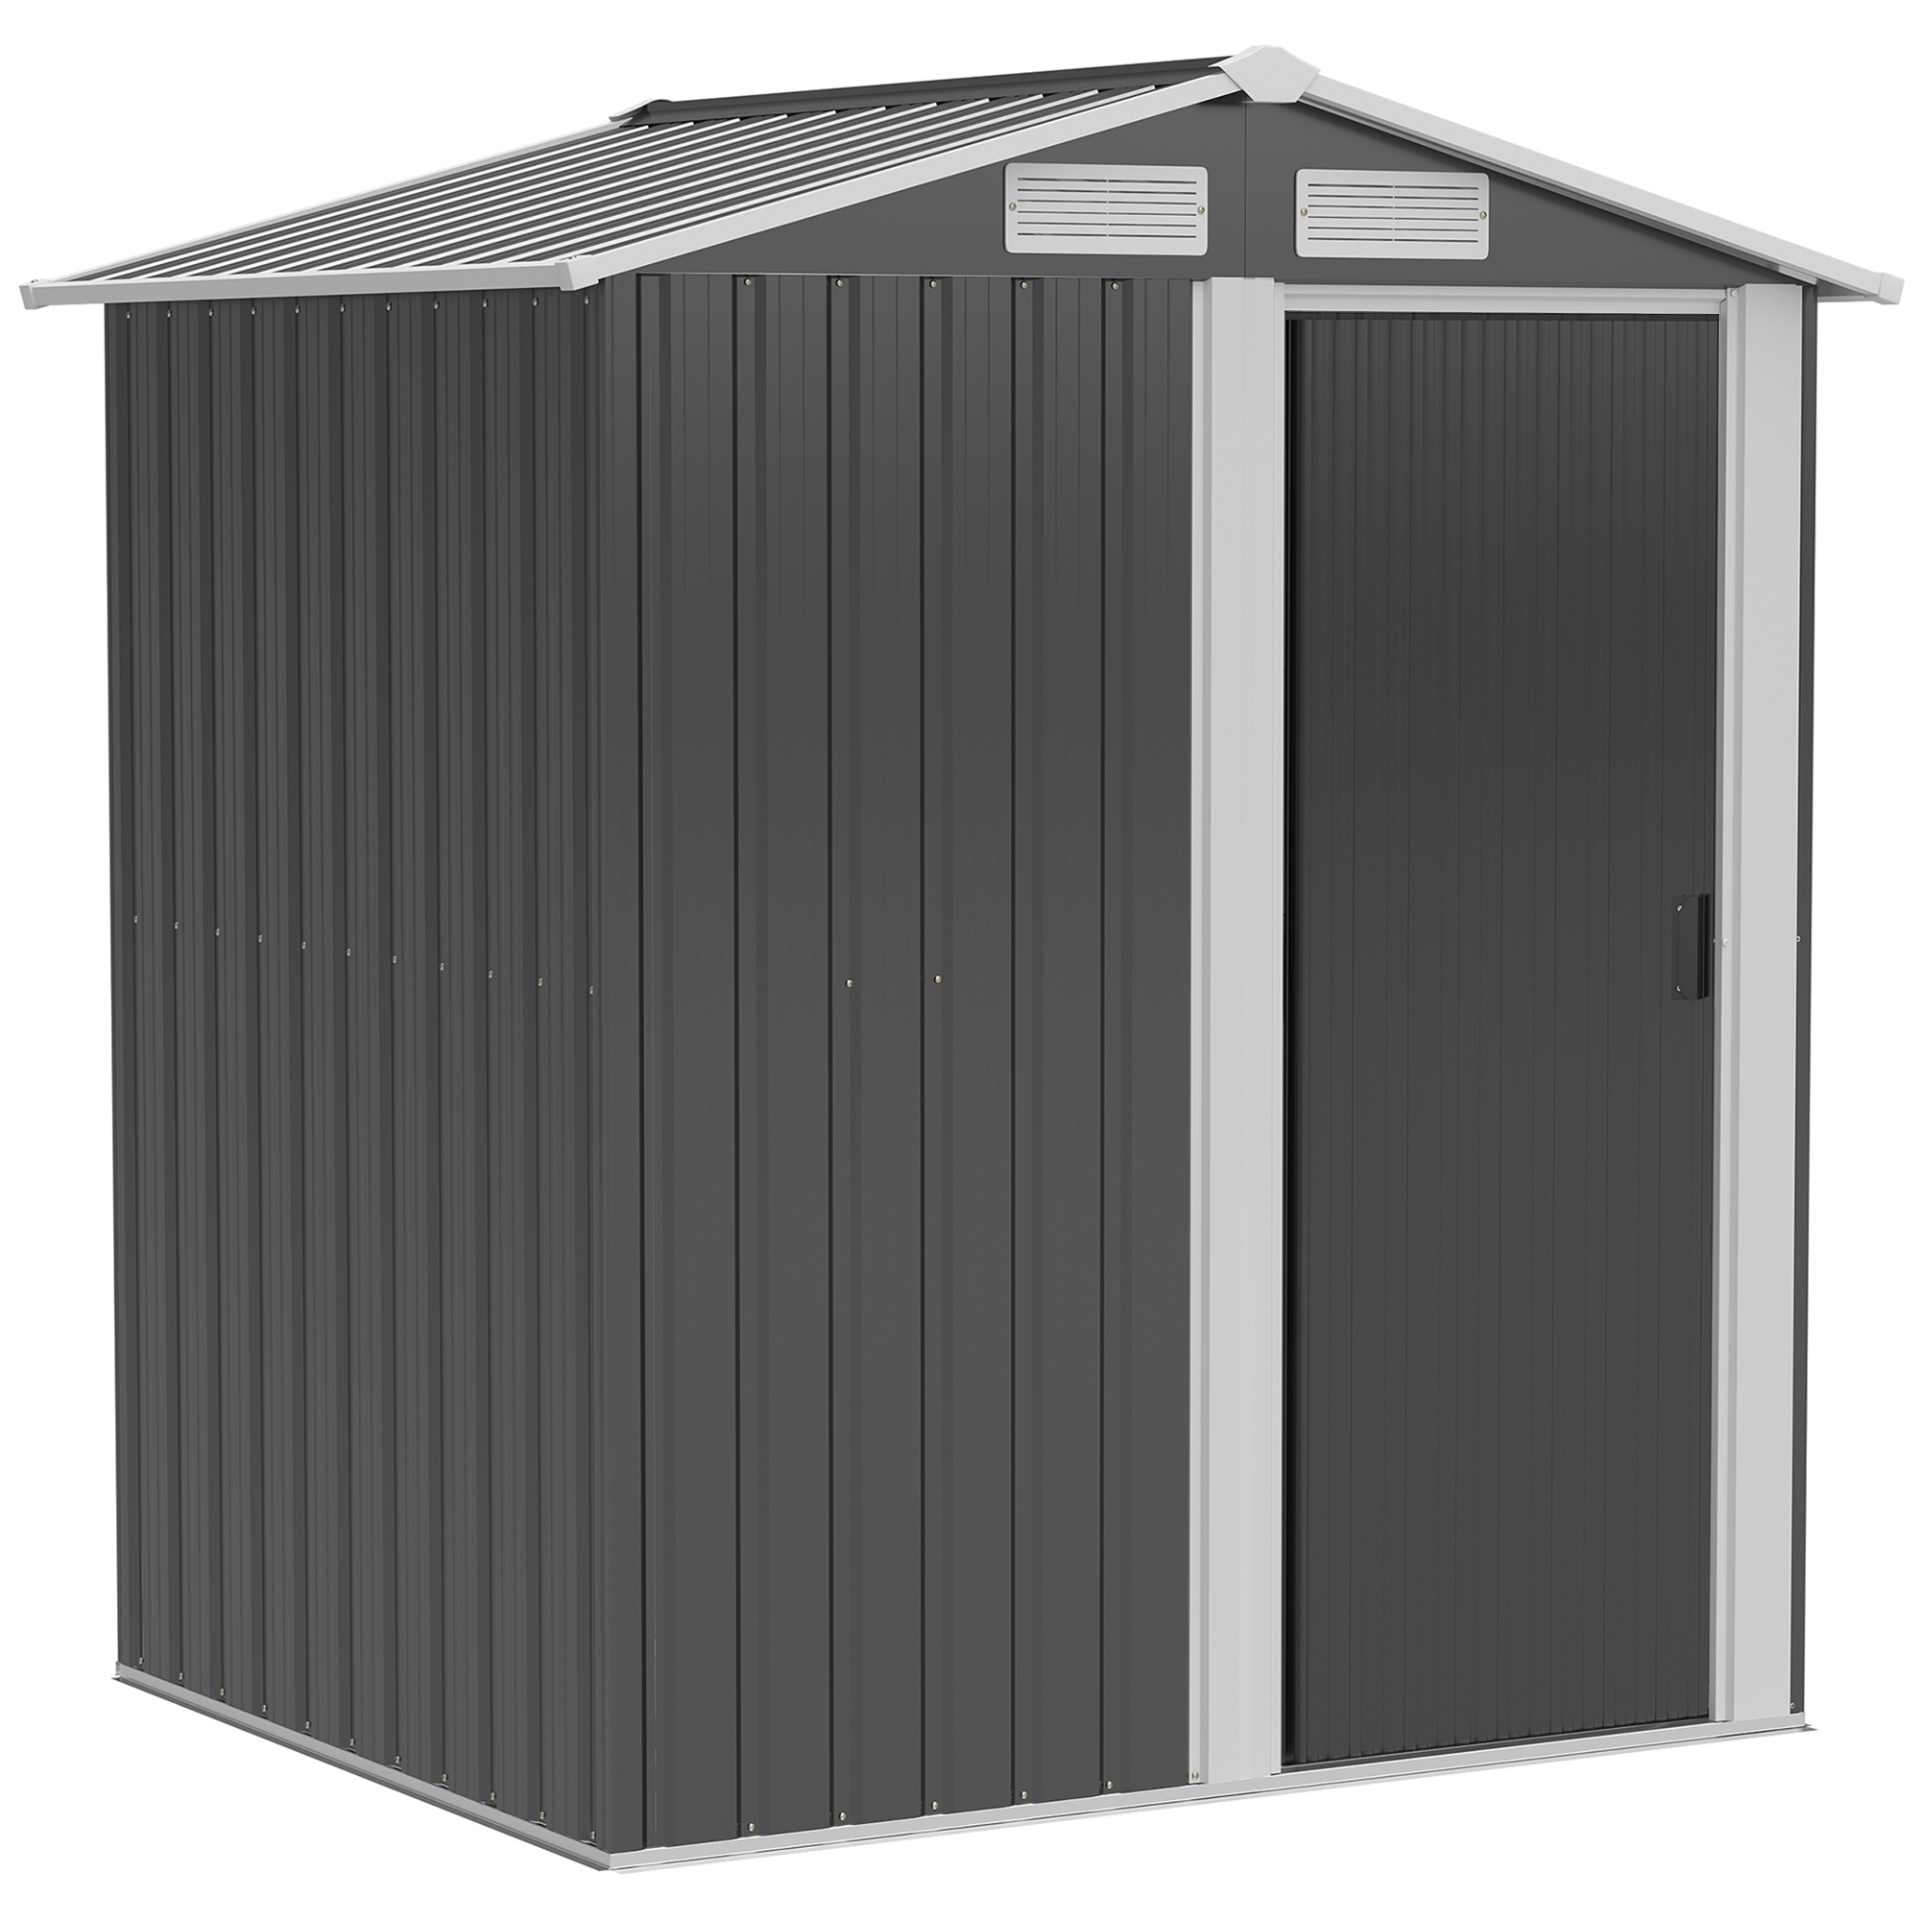 Outsunny 5ft x 4ft Garden Metal Storage Shed Tool Storage Shed with Sliding Doo